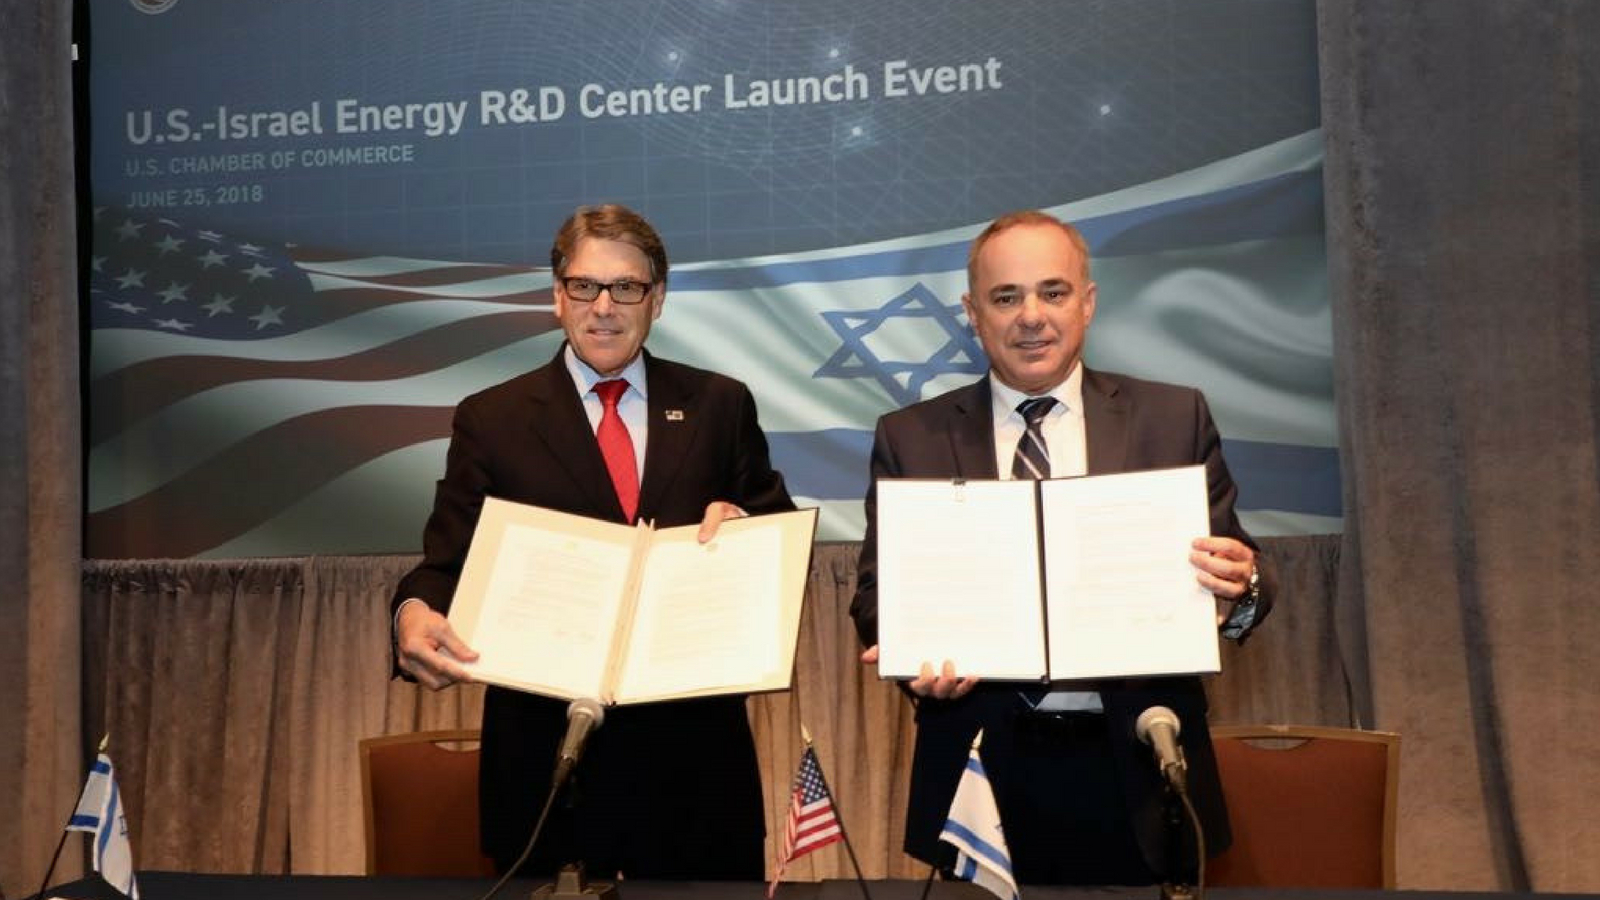 US Secretary of Energy Rick Perry and Israeli Minister of Energy Yuval Steinitz immediately after the signing. Photo credit: Shmulik Almany.